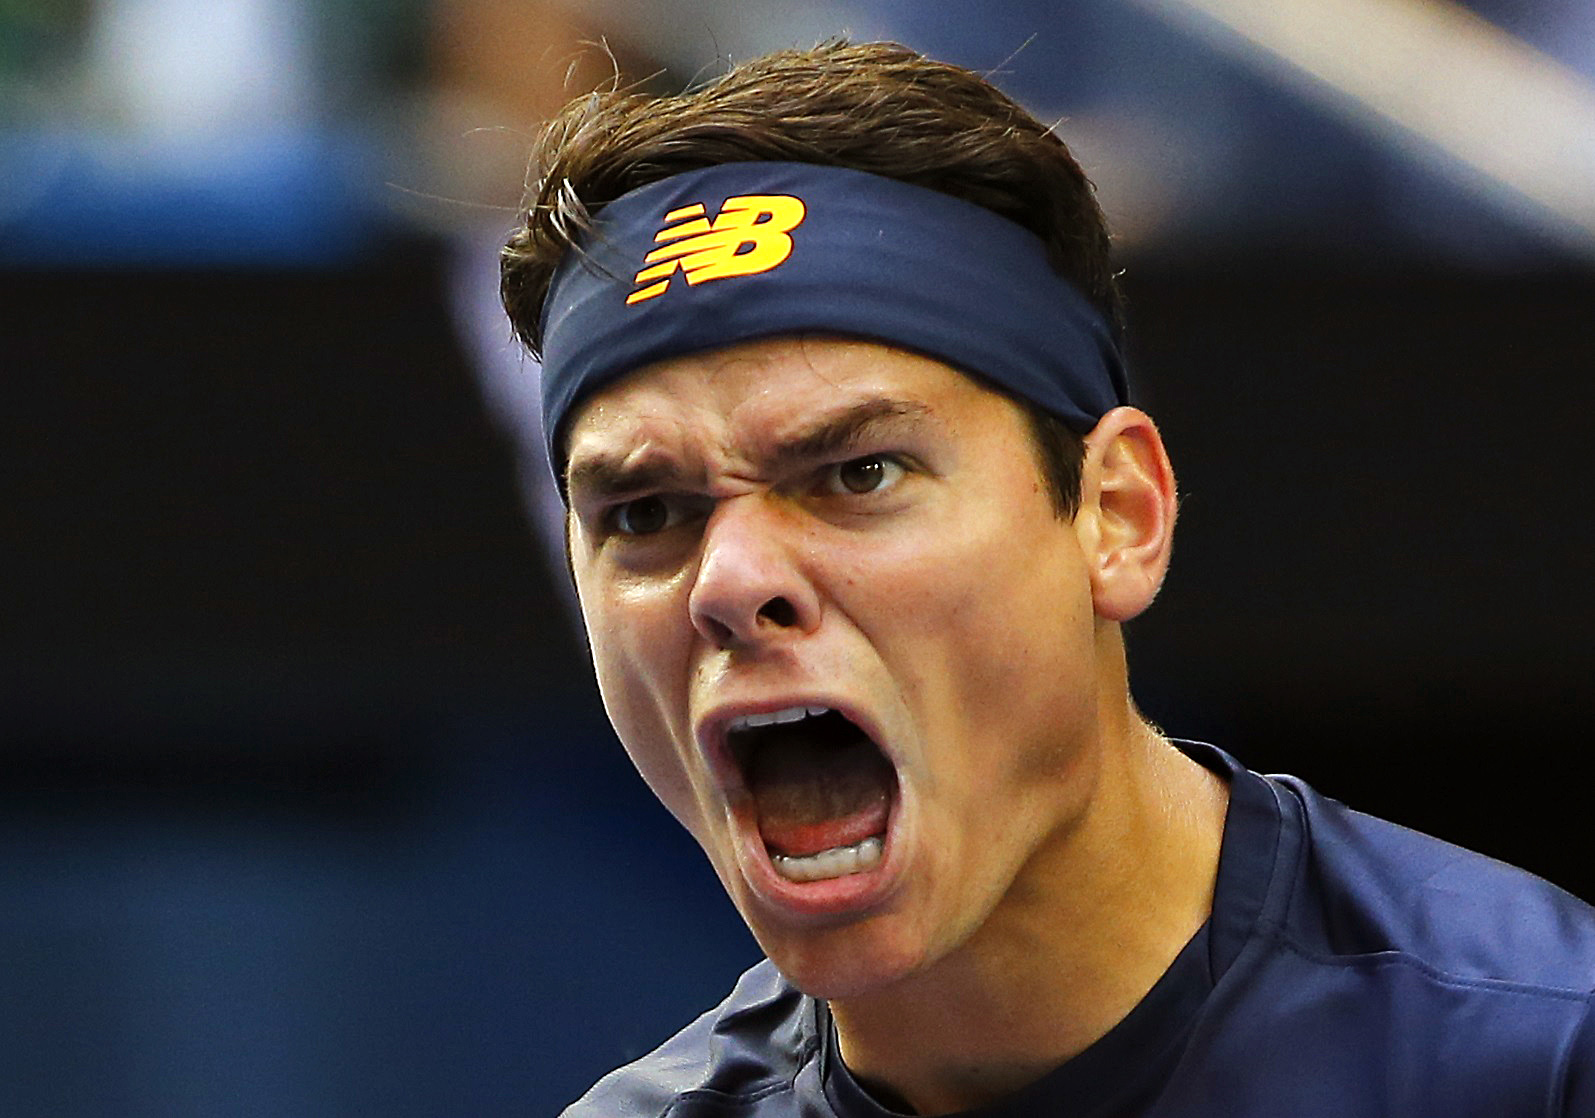 Canada's Milos Raonic reacts during his fourth round match against Switzerland's Stan Wawrinka at the Australian Open tennis tournament at Melbourne Park, Australia, January 25, 2016. REUTERS/Thomas Peter